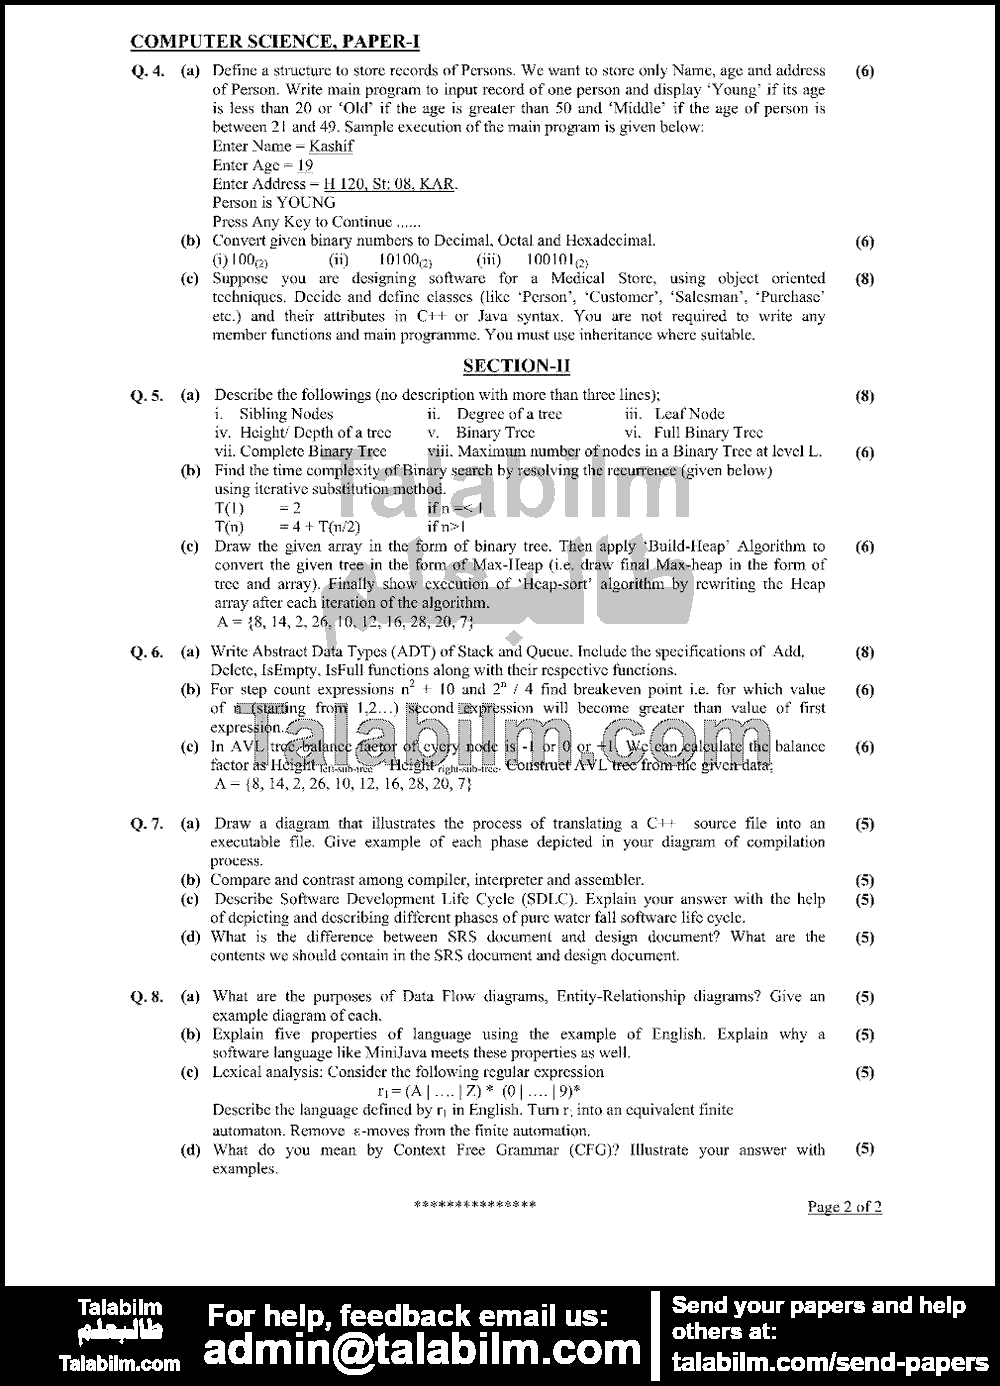 Computer Science 0 past paper for 2016 Page No. 2